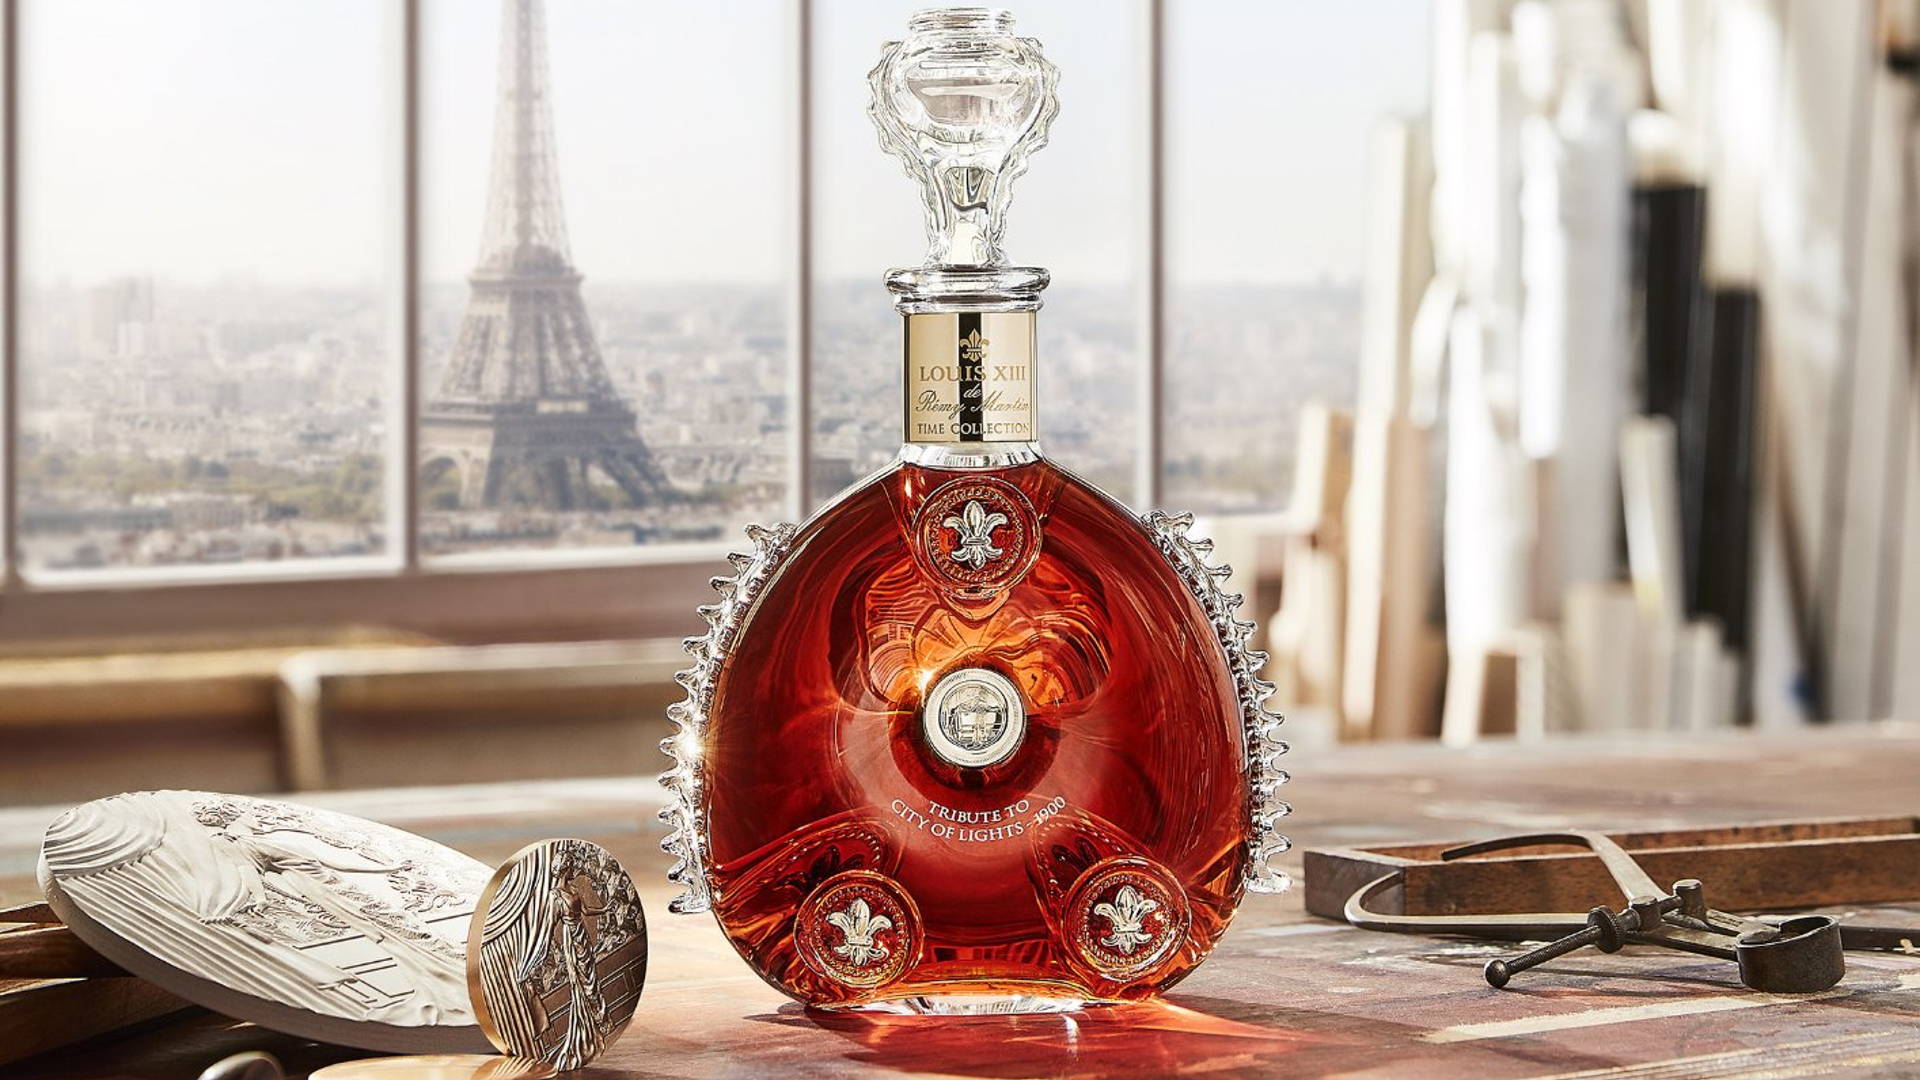 World-First Louis XIII Cognac Boutique At Harrods Sells $95,000 Bottle In  Opening Days